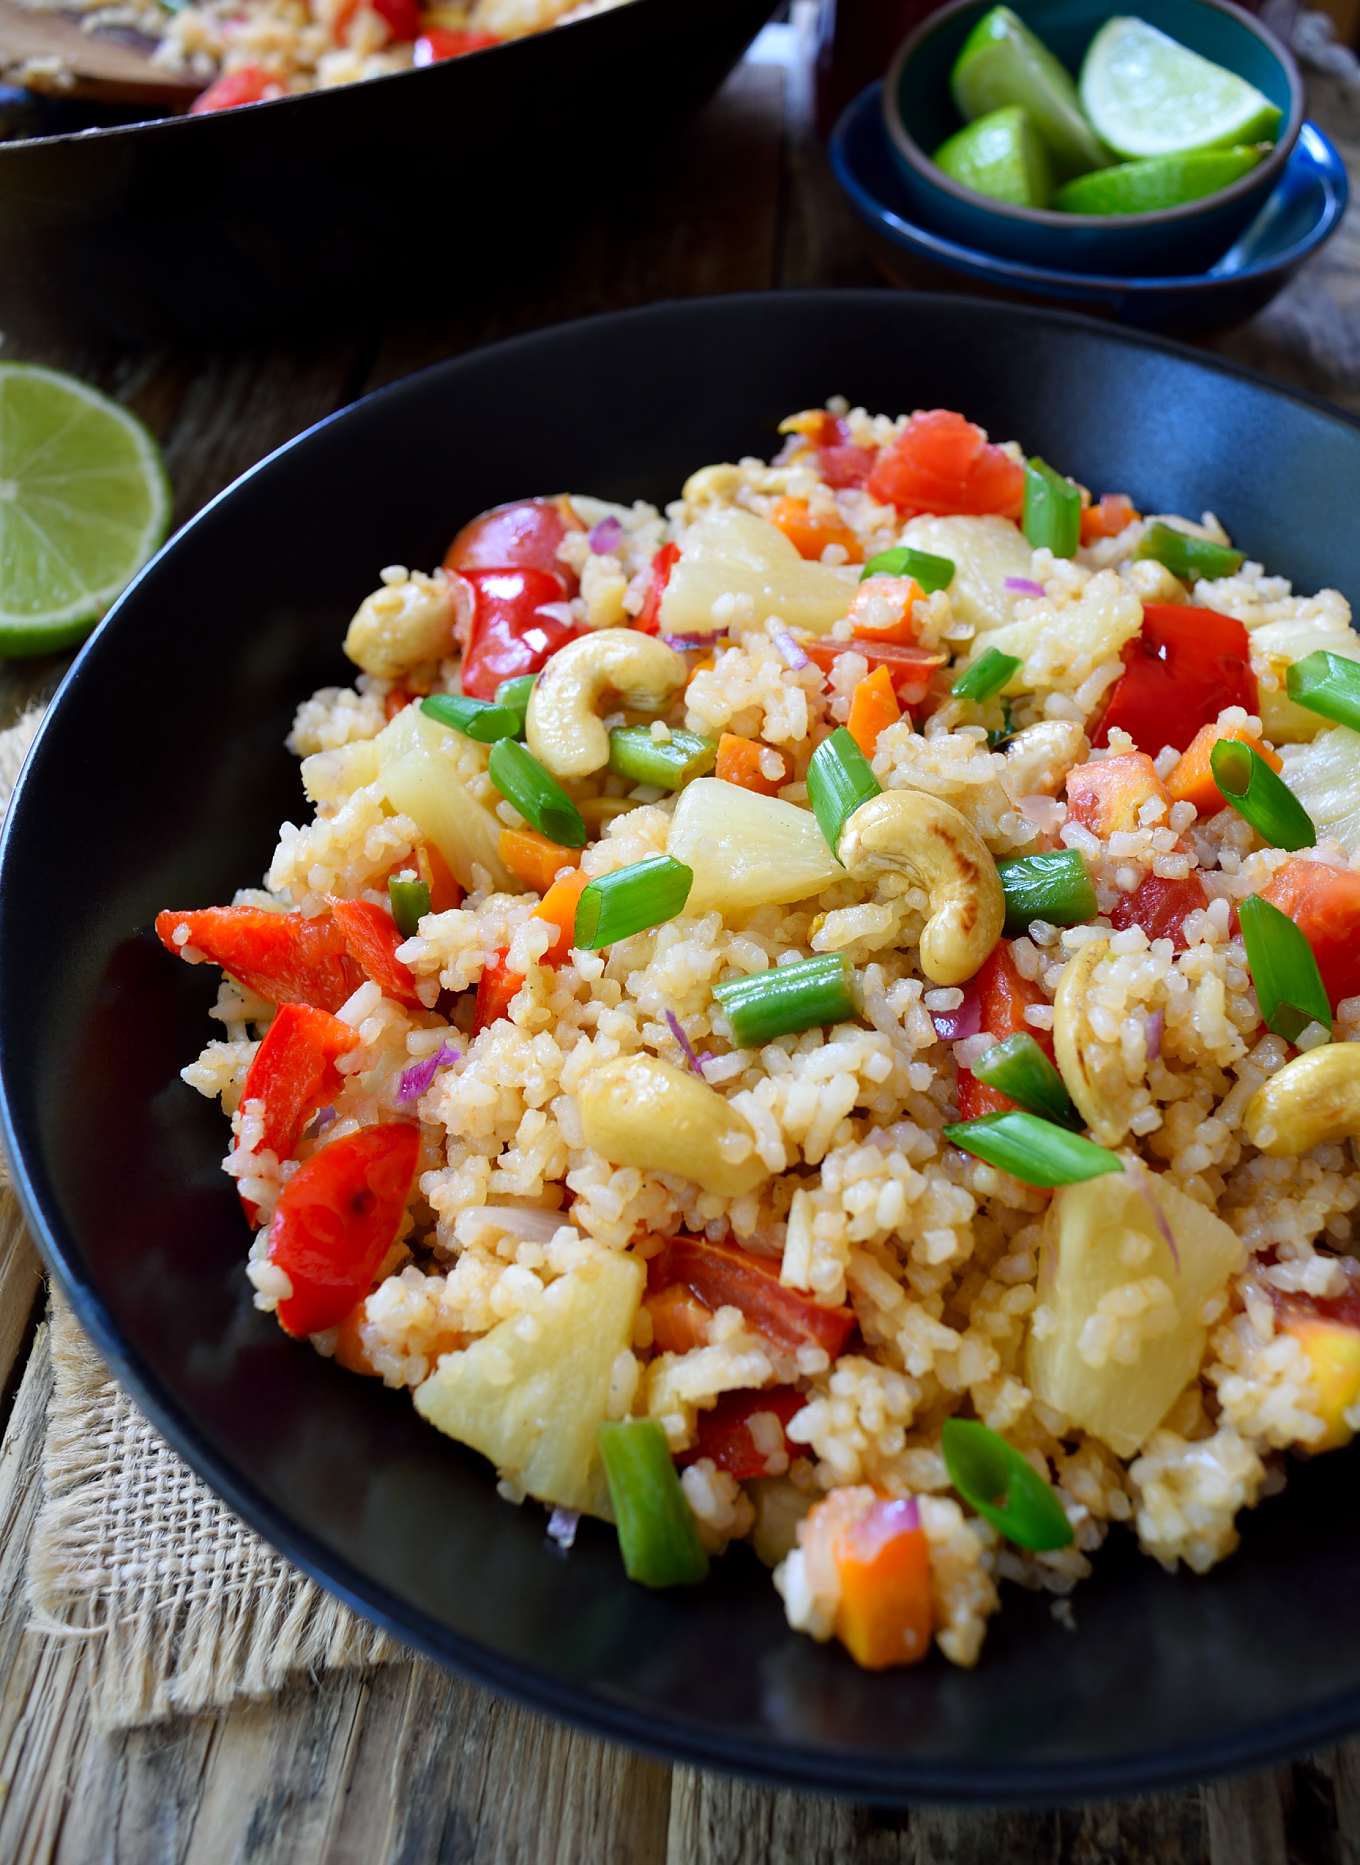 You know what they say: eat the rainbow, and this colorful vegan fried rice recipe will help you do just that! I love recipes that can be thrown together in a matter of minutes for a quick and easy weeknight dinner and fried rice is a definite go-to for those days when you have neither the time nor inclination to cook.